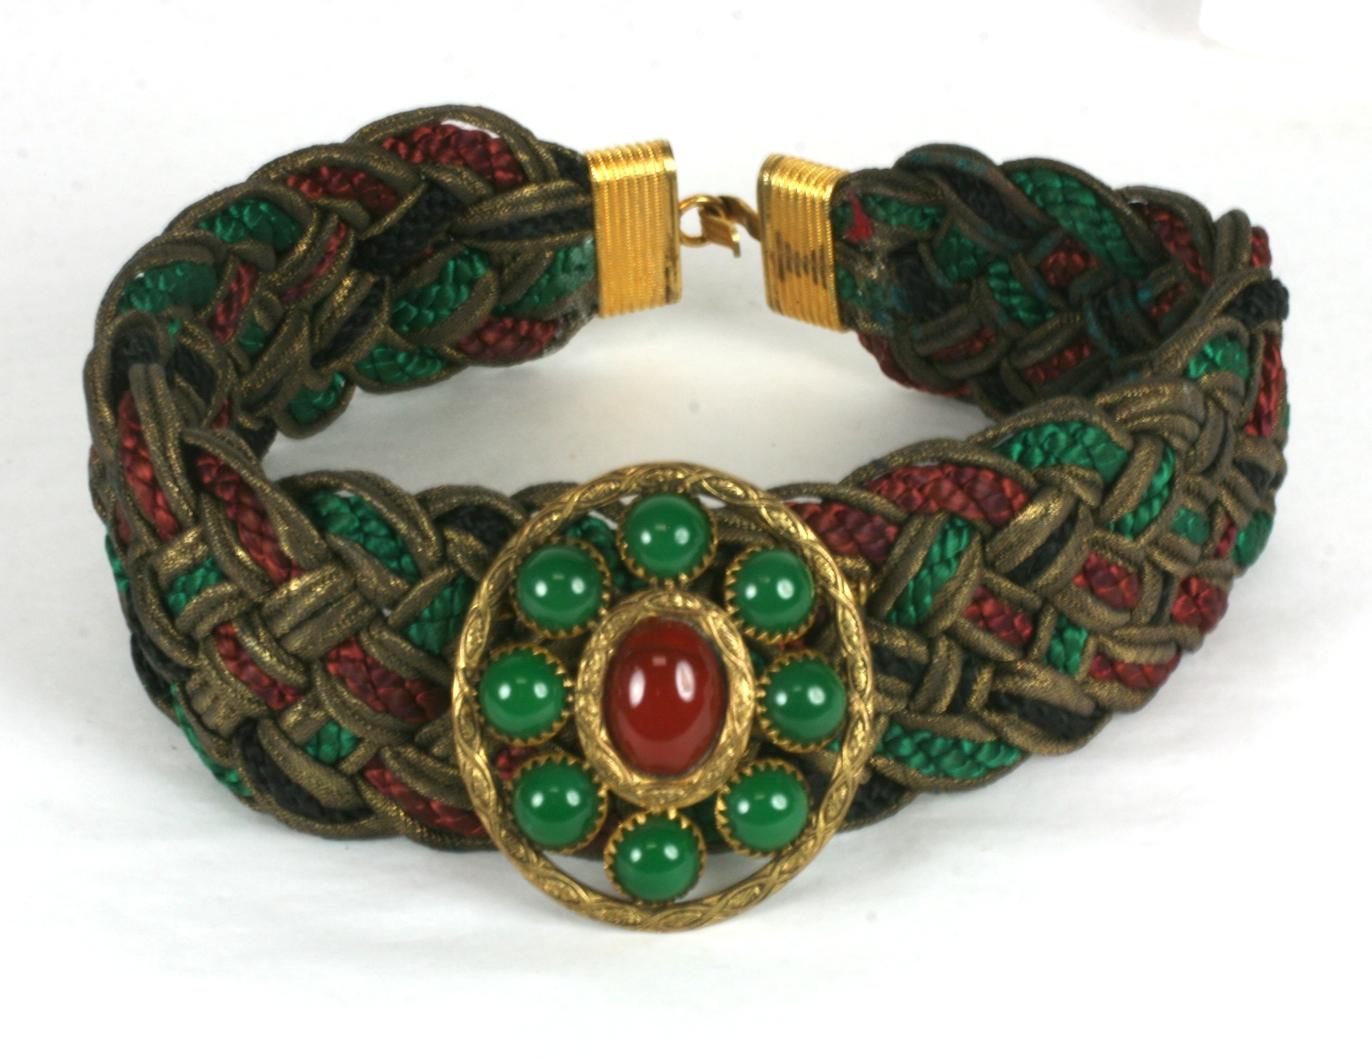 Yves Saint Laurent Braided Jeweled Haute Couture Choker of colored braid and gold lame ribbon with jeweled central motif of pate de verre carnelian and green onyx cabochons set in a gilt filigree frame. Deep ruby, emerald and jet silk braid are